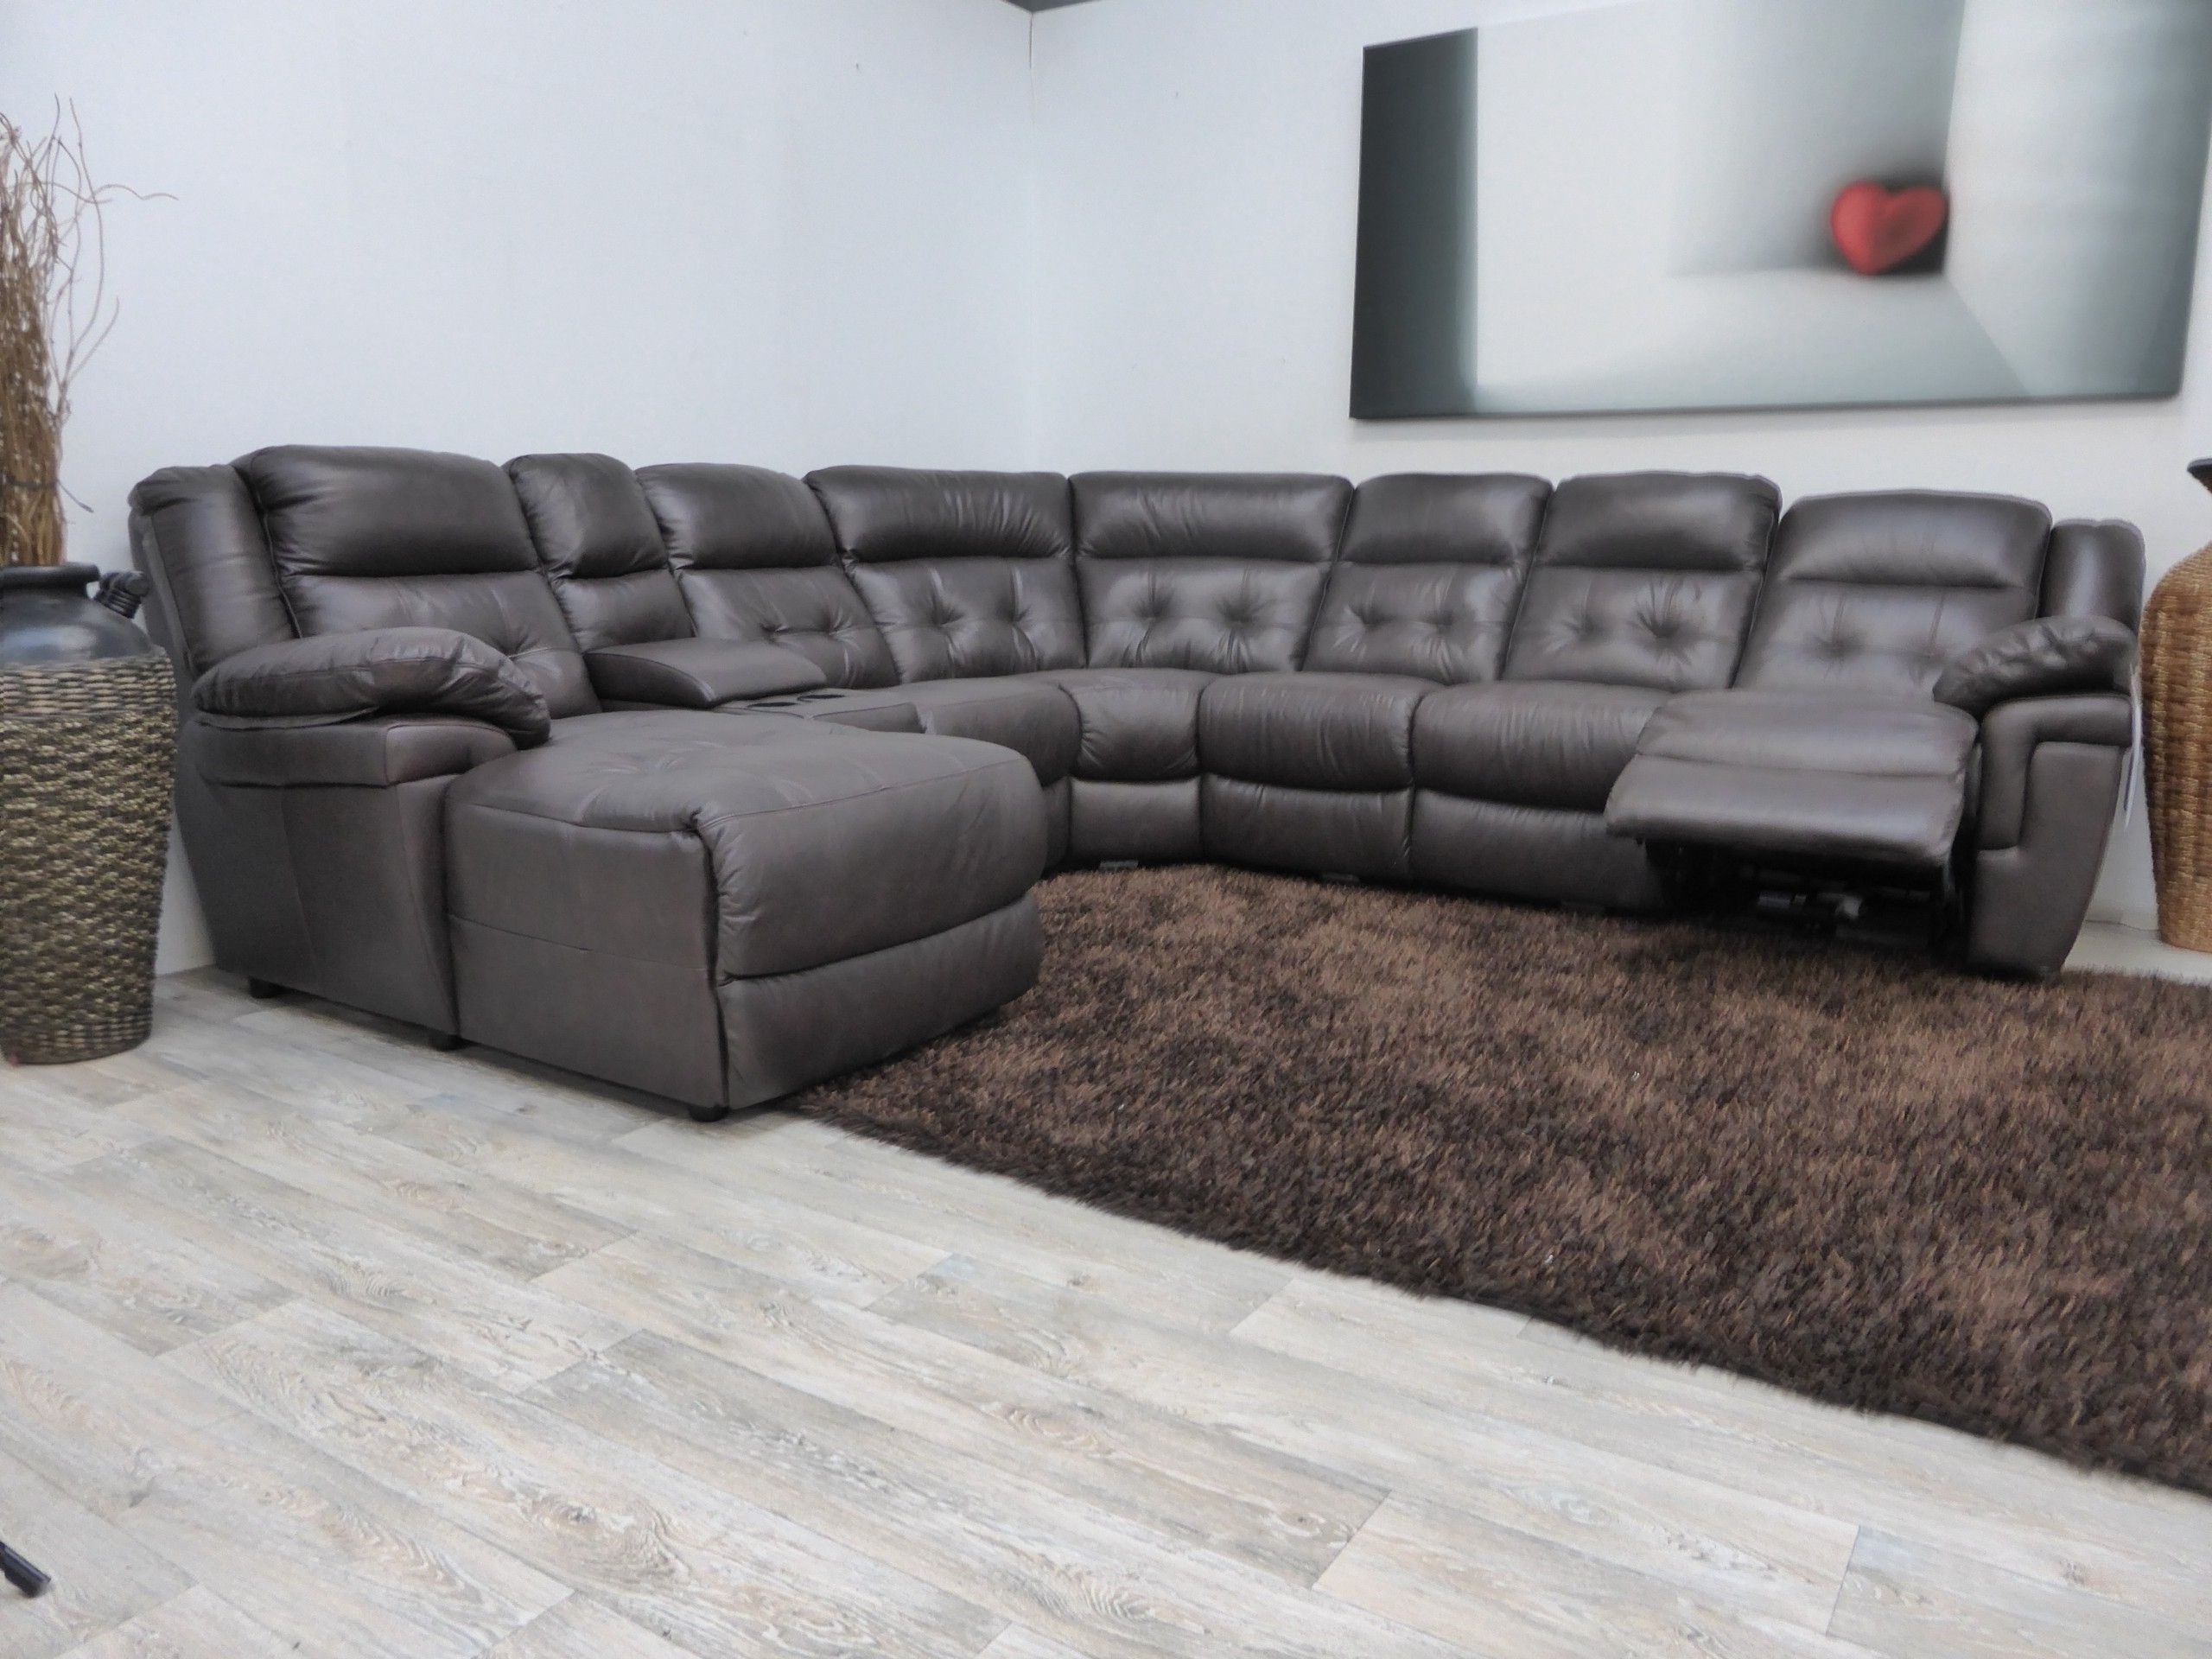 20 The Best Sectional Sofas At Craigslist